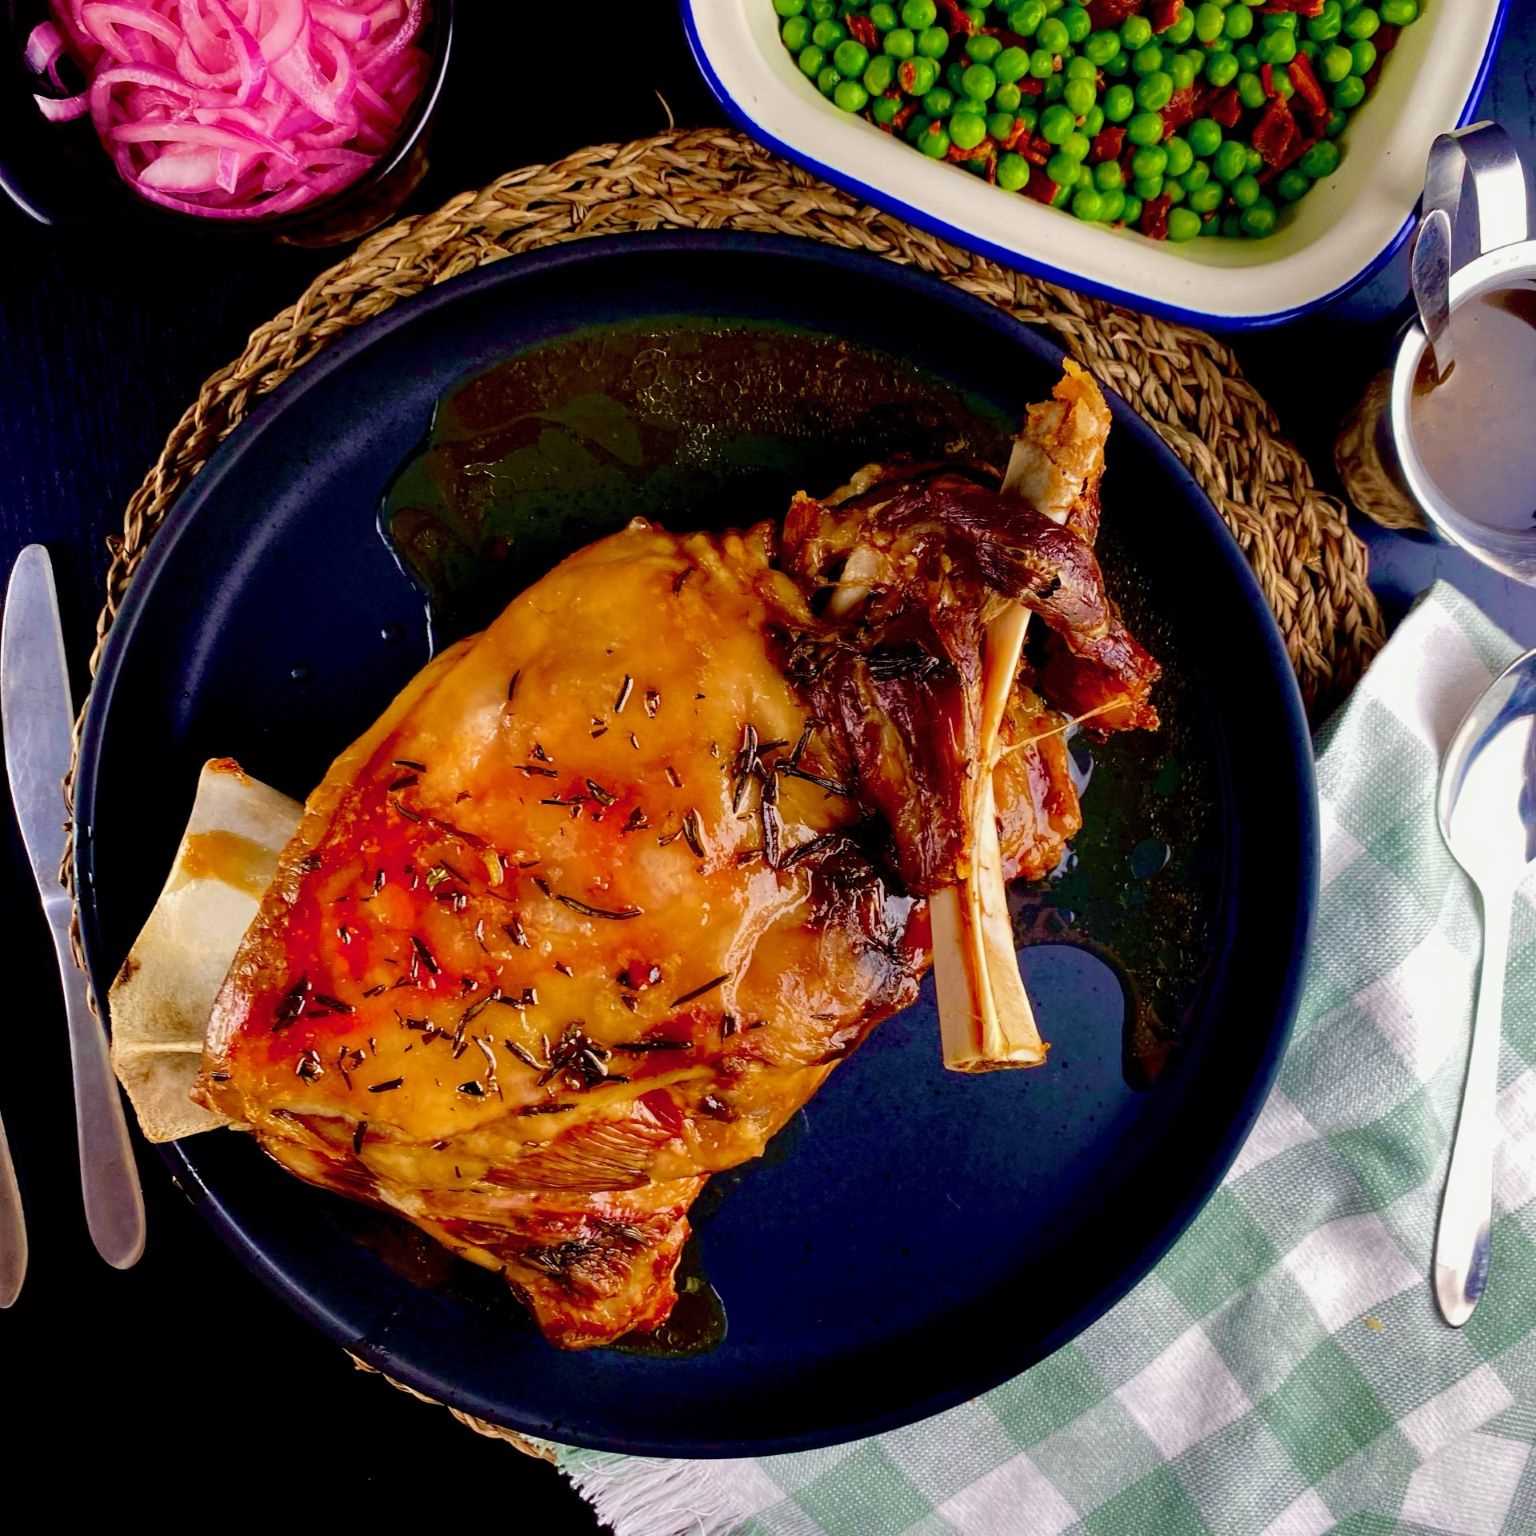 10 Hour Slow Cooked Lamb Shoulder<div class="yasr-vv-stars-title-container"><div class='yasr-stars-title yasr-rater-stars'
id='yasr-visitor-votes-readonly-rater-b2166ca359134'
data-rating='5'
data-rater-starsize='16'
data-rater-postid='1248'
data-rater-readonly='true'
data-readonly-attribute='true'
></div><span class='yasr-stars-title-average'>5 (1)</span></div>